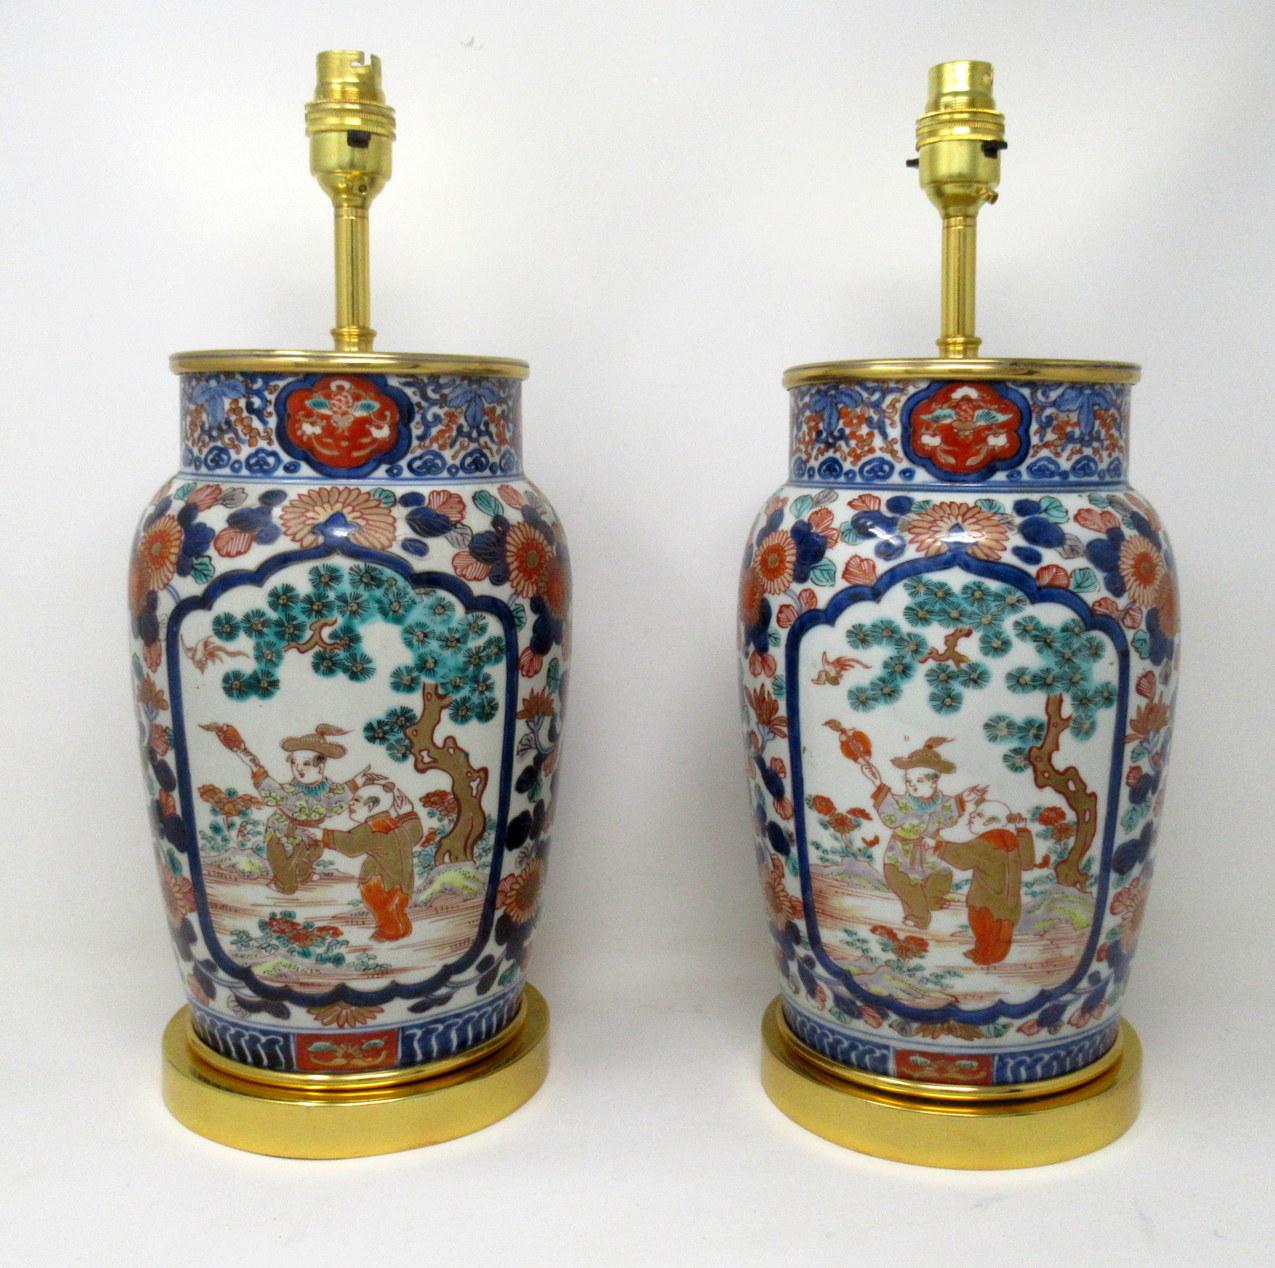 Stunning pair of Traditional Japanese Imari Bulbous form porcelain vases of generous proportions, now converted to a pair of electric table lamps, complete with their later Ormolu stepped bases and mounts, first half of the 19th century.

The main